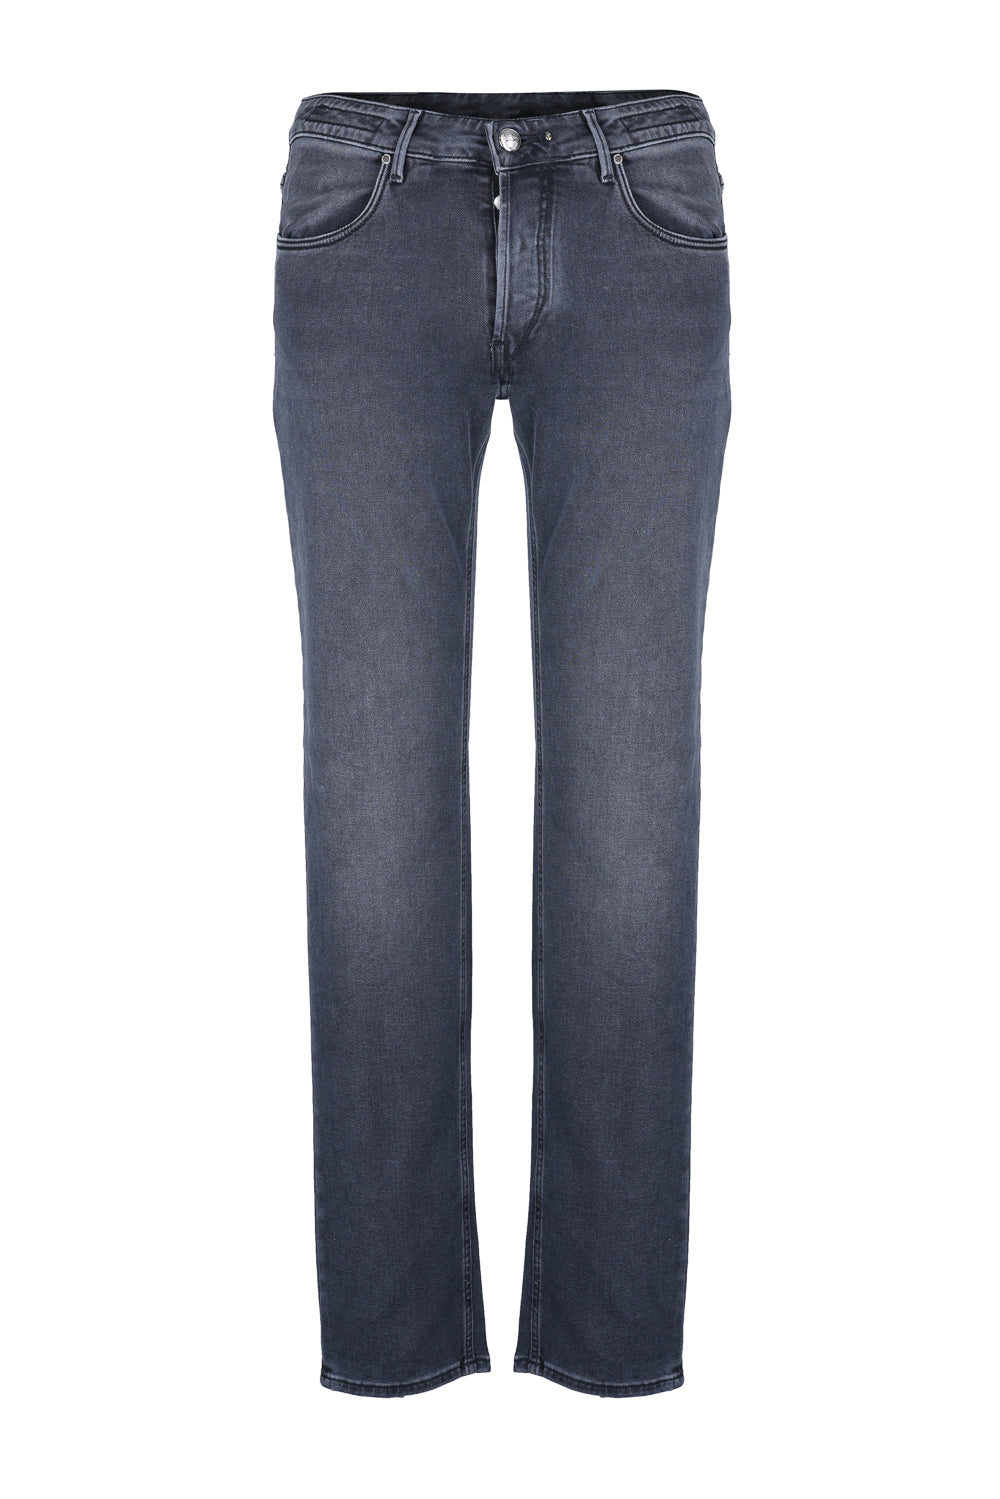 Load image into Gallery viewer, Hand Picked Ravello Charcoal Jean
